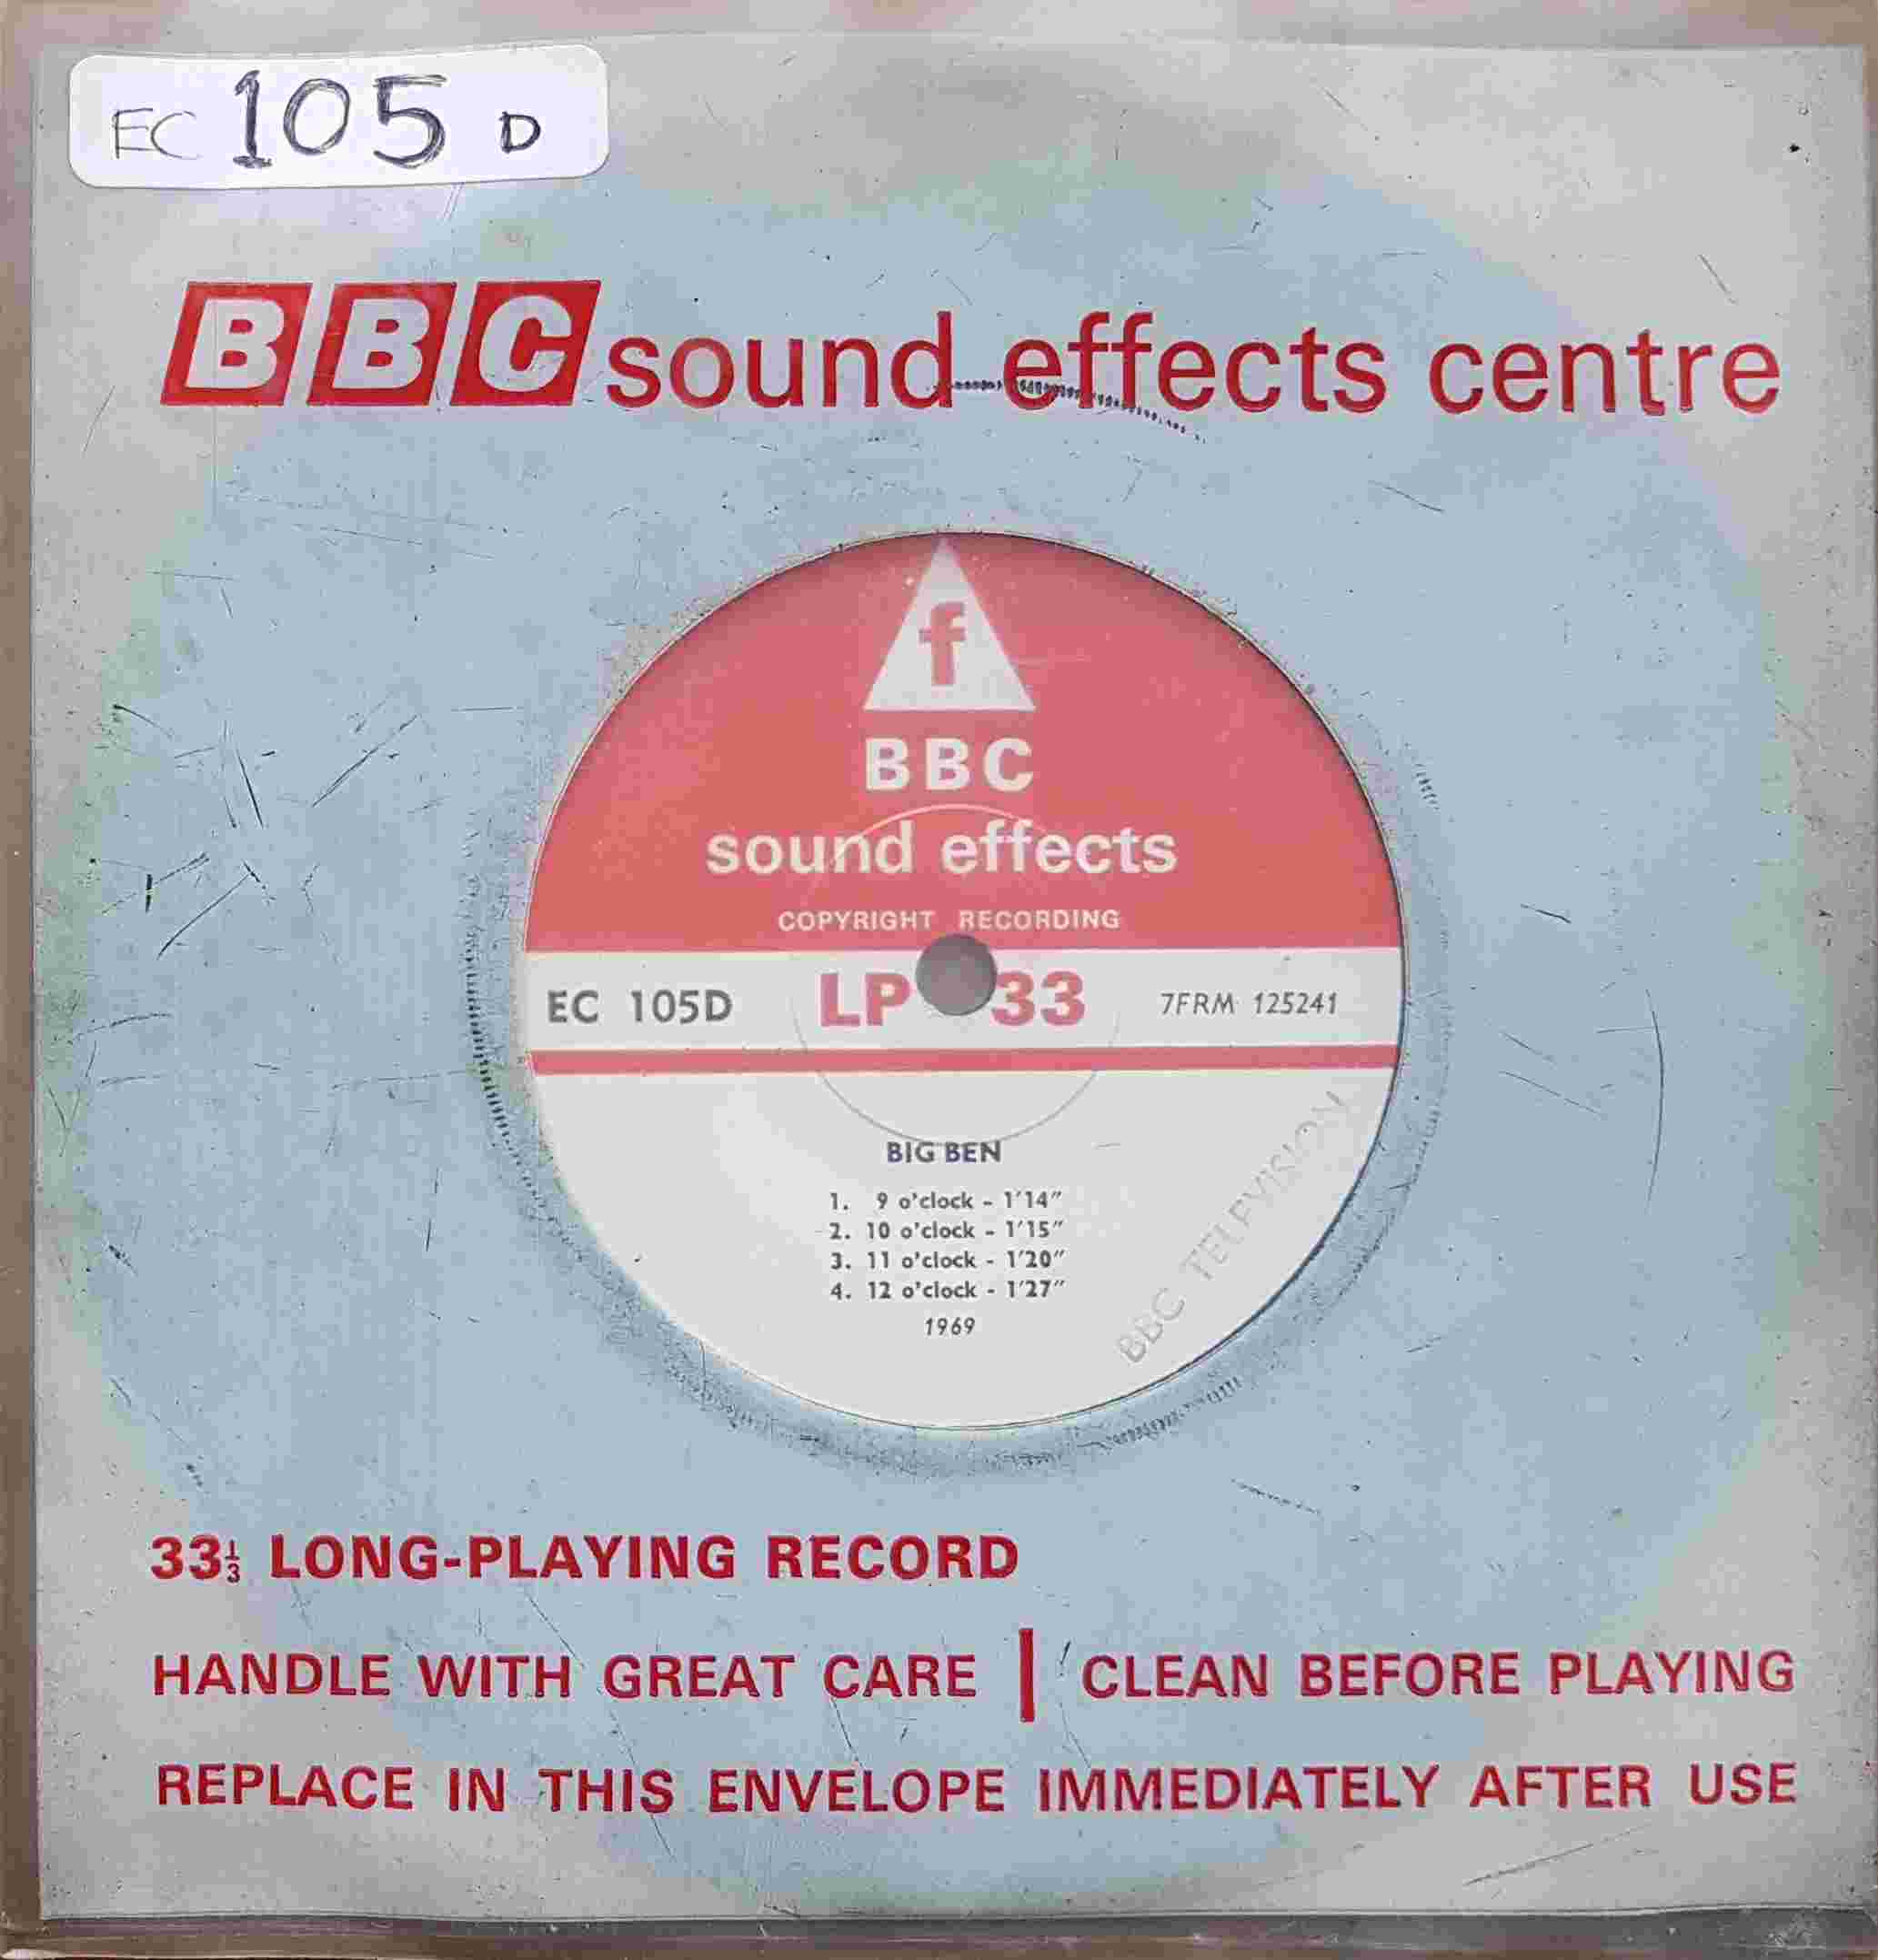 Picture of EC 105D Big Ben by artist Not registered from the BBC records and Tapes library